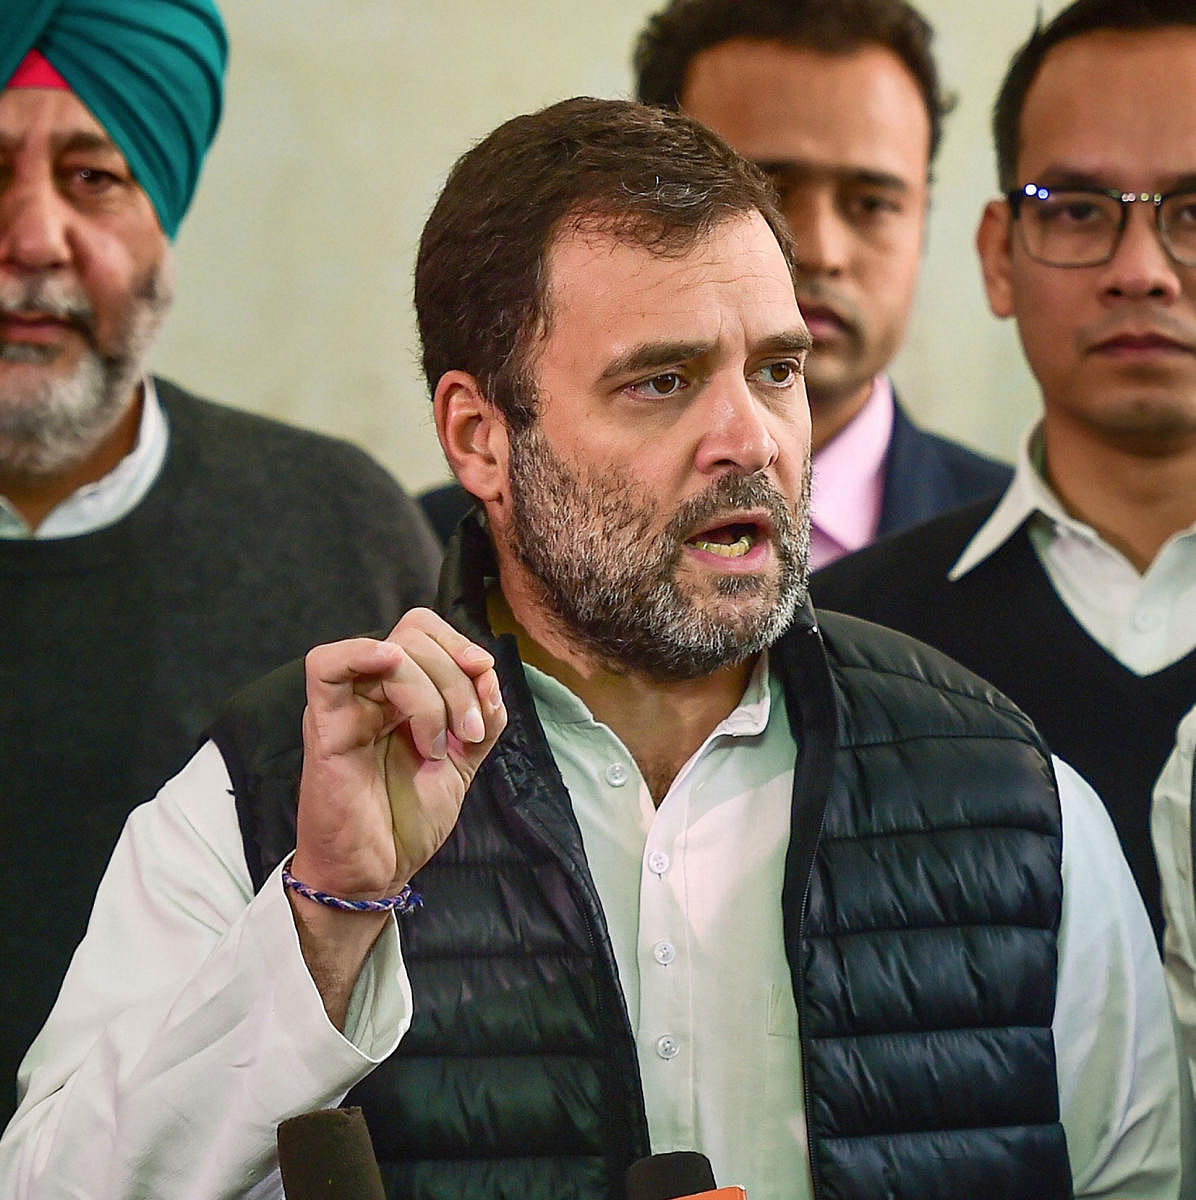 Rahul Gandhi had said on February 12 that the government should take the coronavirus threat seriously and must address the issue immediately, failing which the country and its people may suffer. (PTI File Photo)